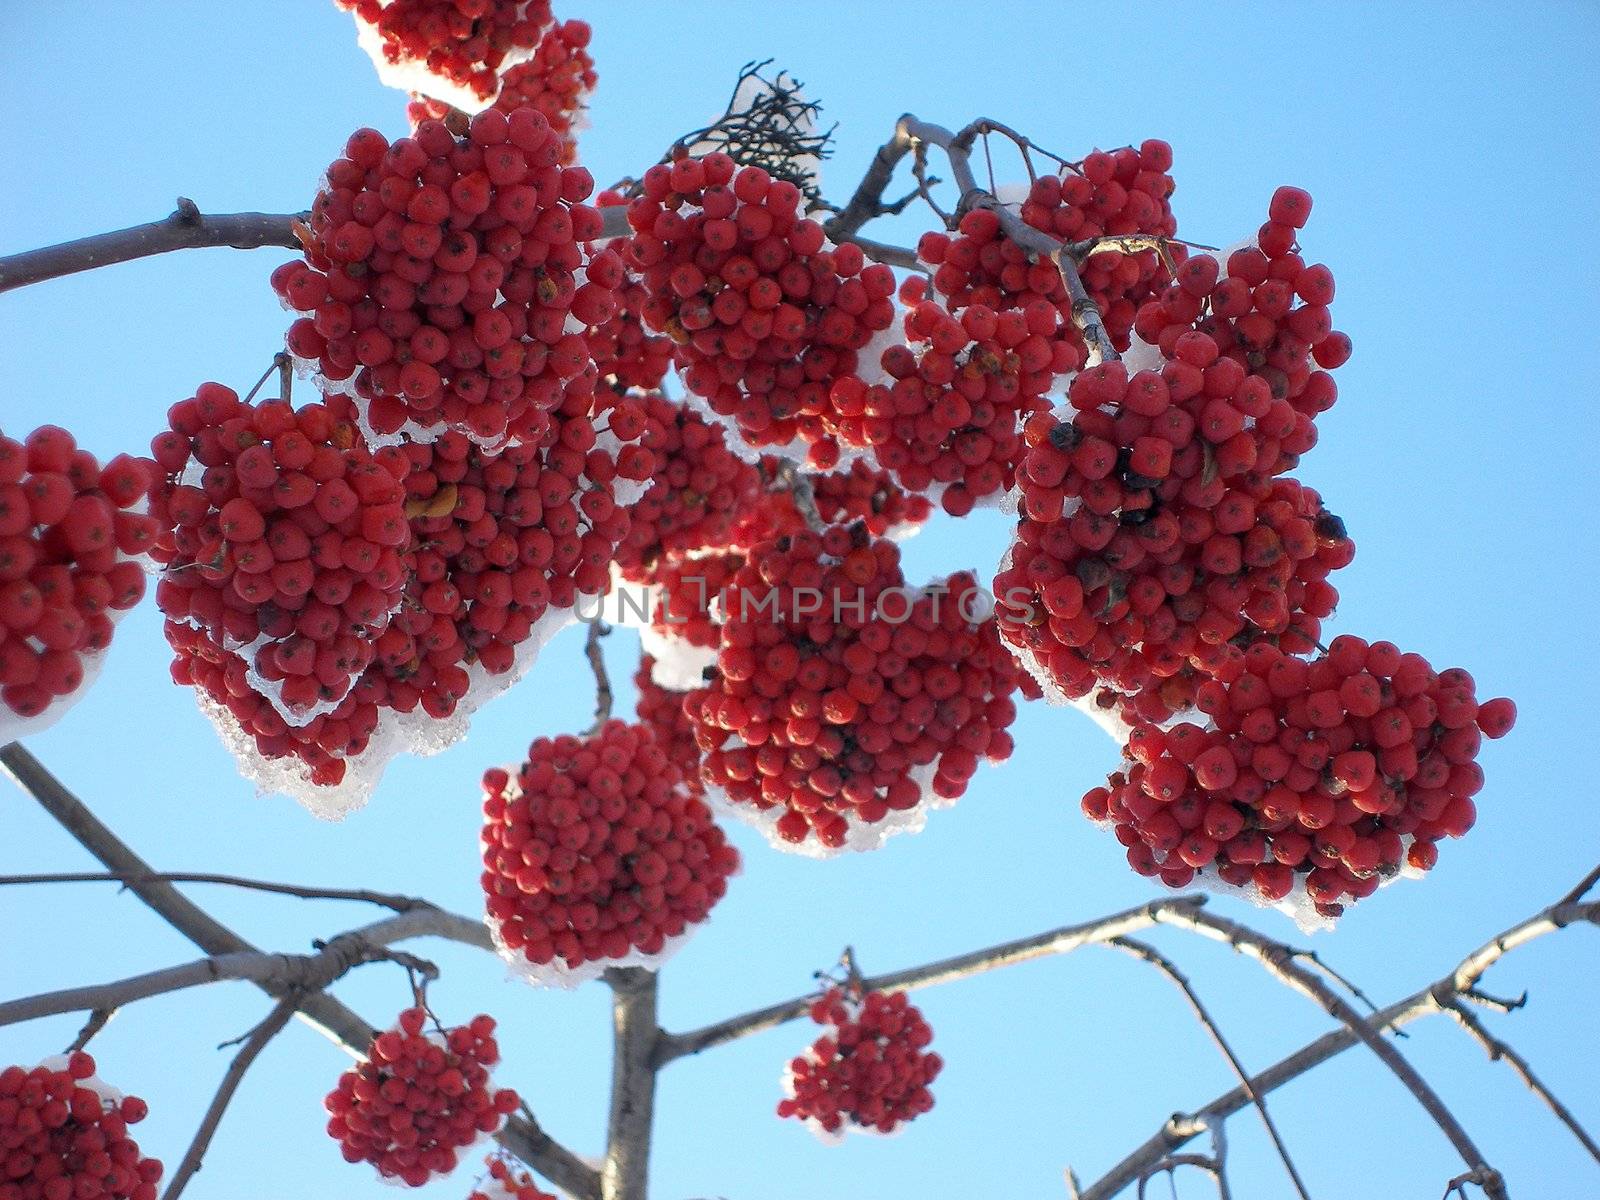 Mountain ash, branches and clusters of berries on snow. Winter, Novosibirsk, Russia